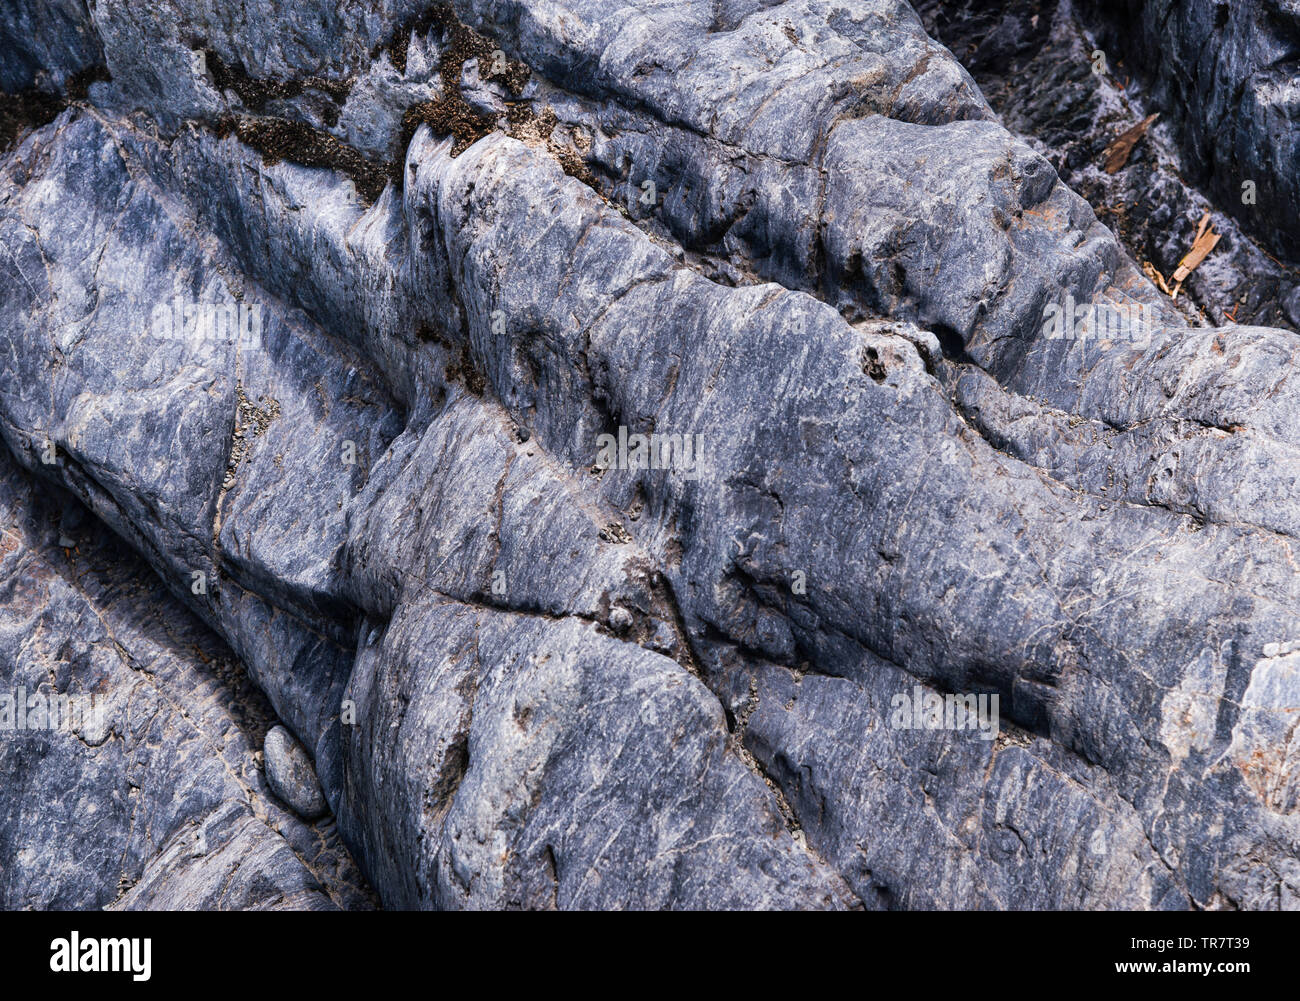 Abstracted detail of the rocky shore of Te Hoiere / Pelorus River, in the Marlborough region of New Zealand Stock Photo